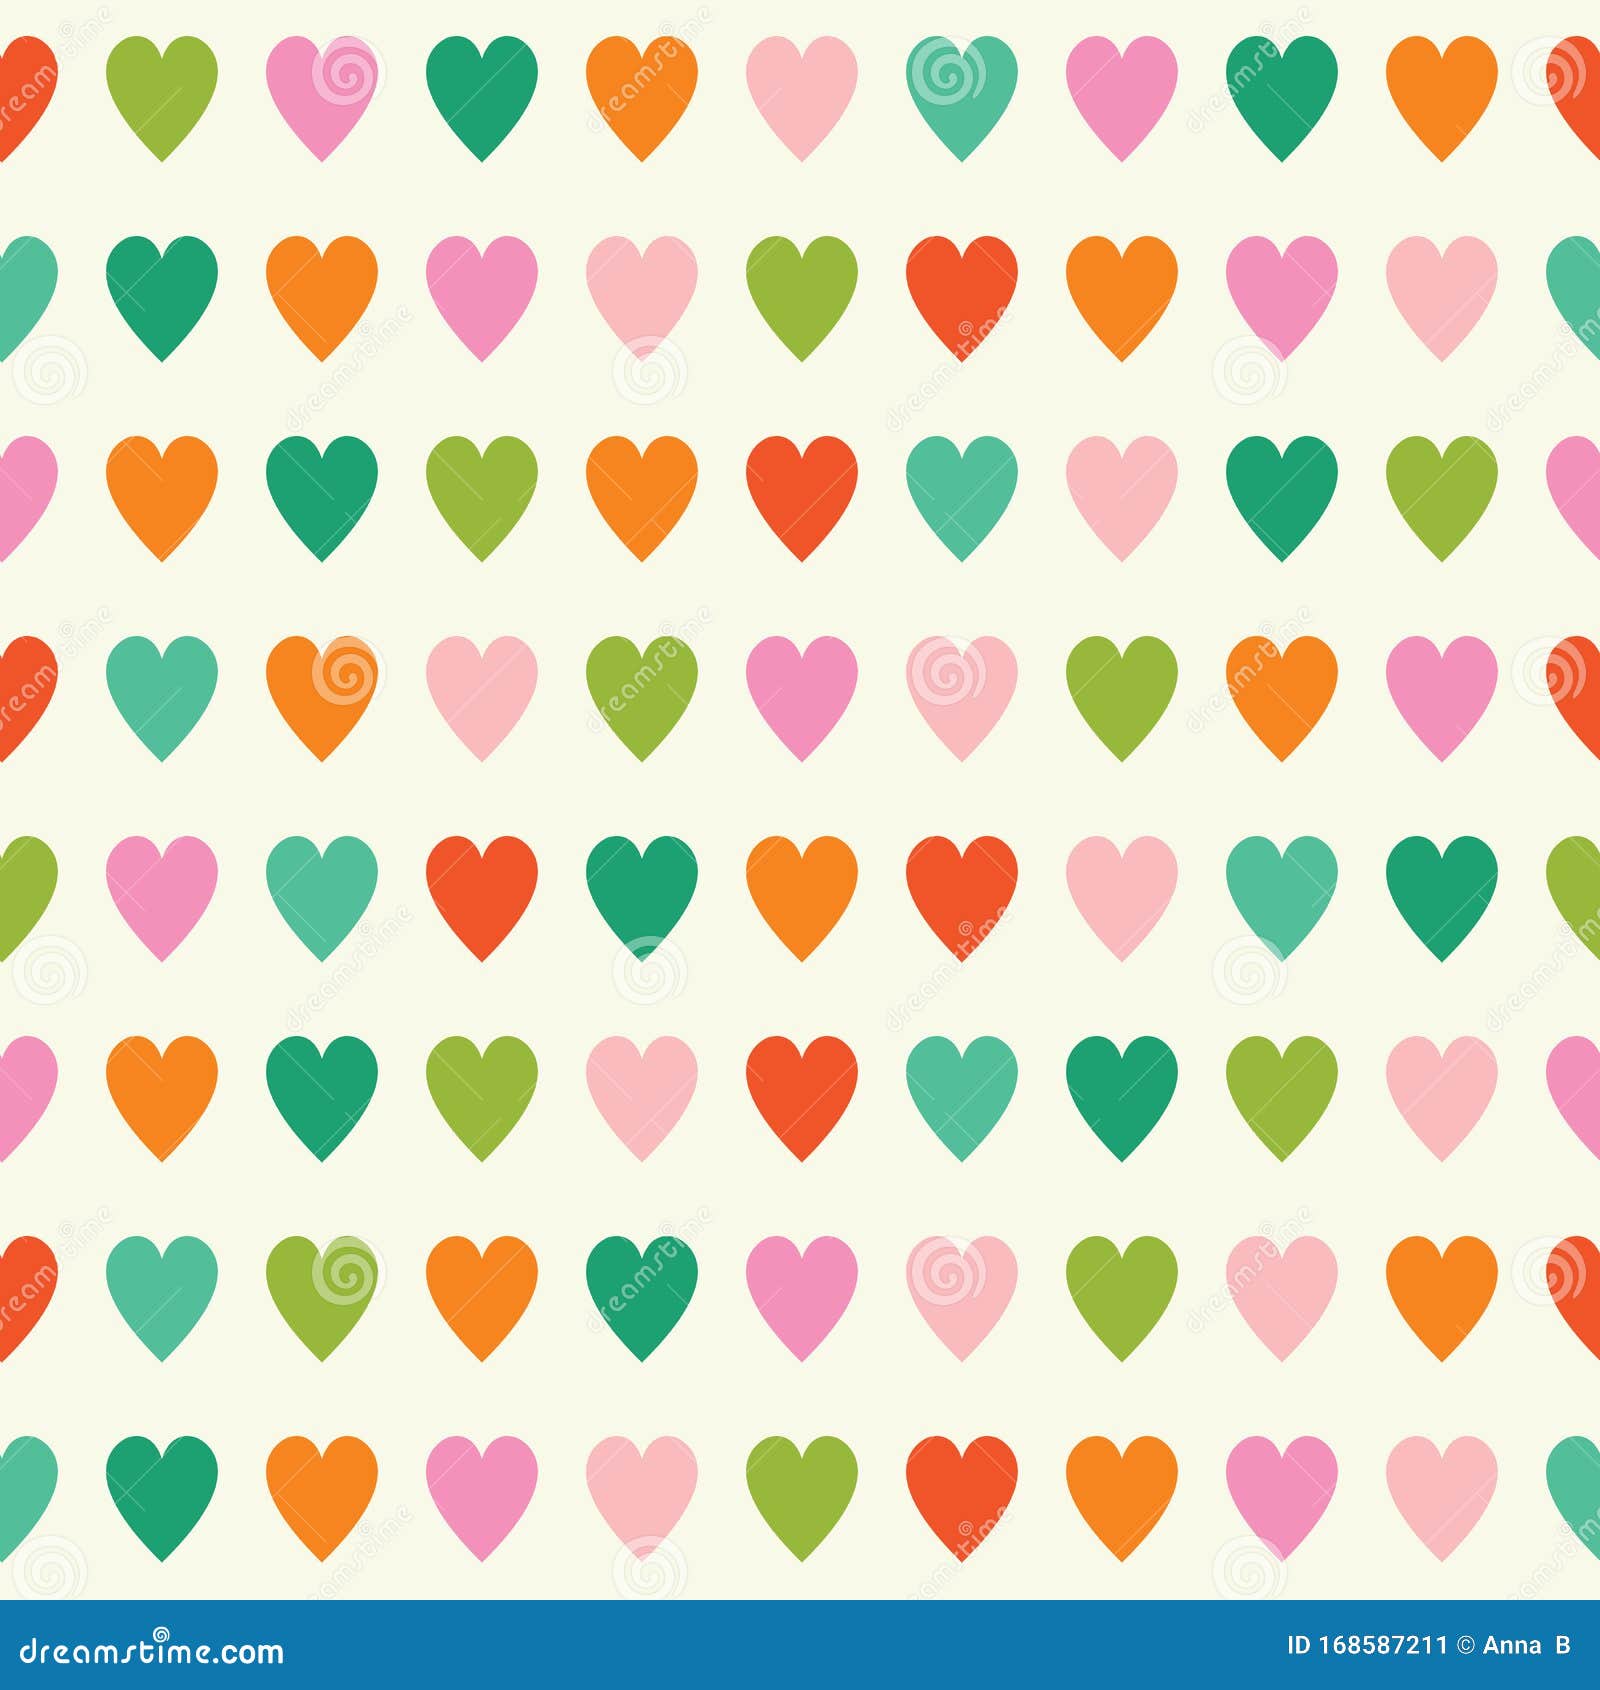 Heart Pattern. Geometric Colourful Vector Seamless Repeat Design ...